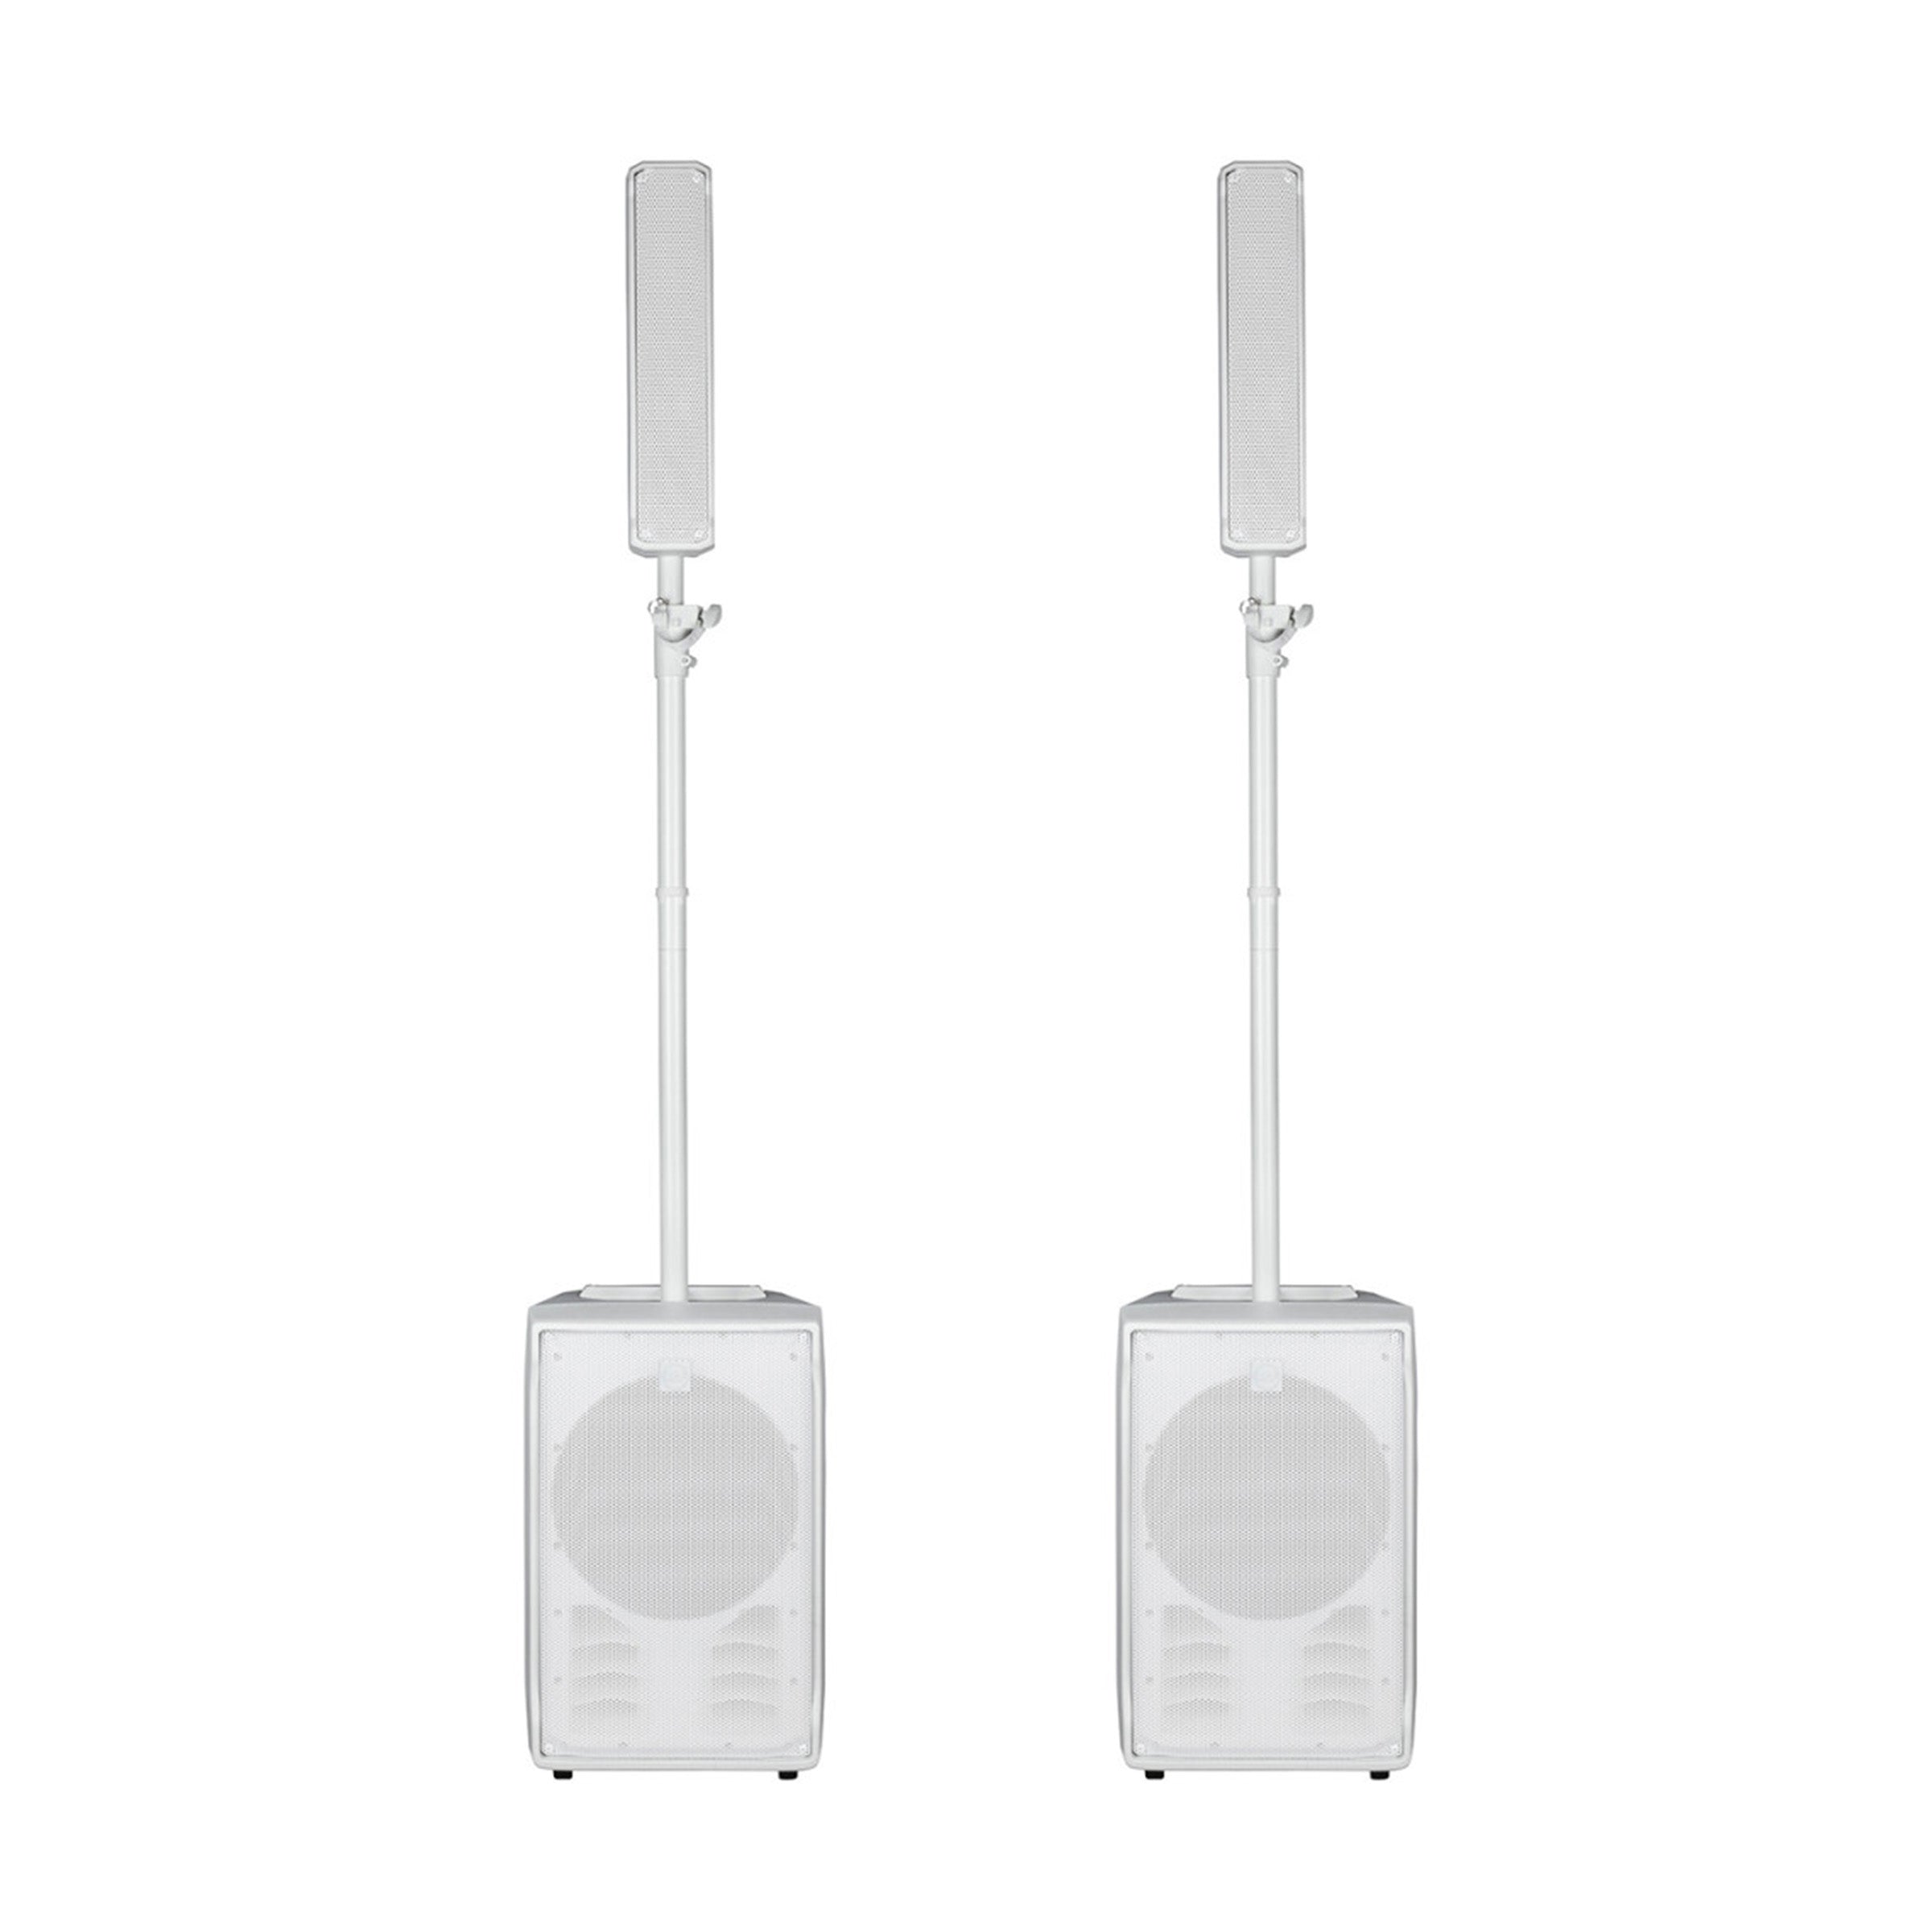 RCF EVOX J8 Active Array PA System White (Pair)